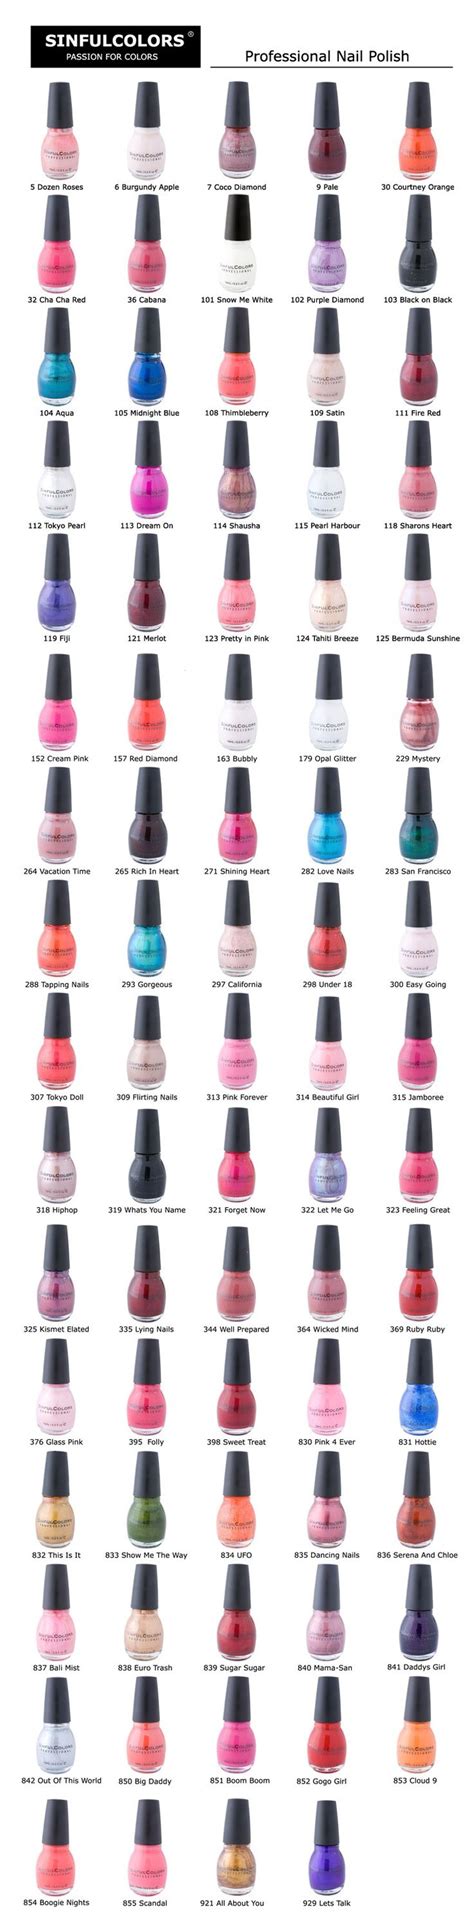 SinfulColors Nail Polish Colour Chart I Get Mine At Walgreens For Less Than E Sinful Colors